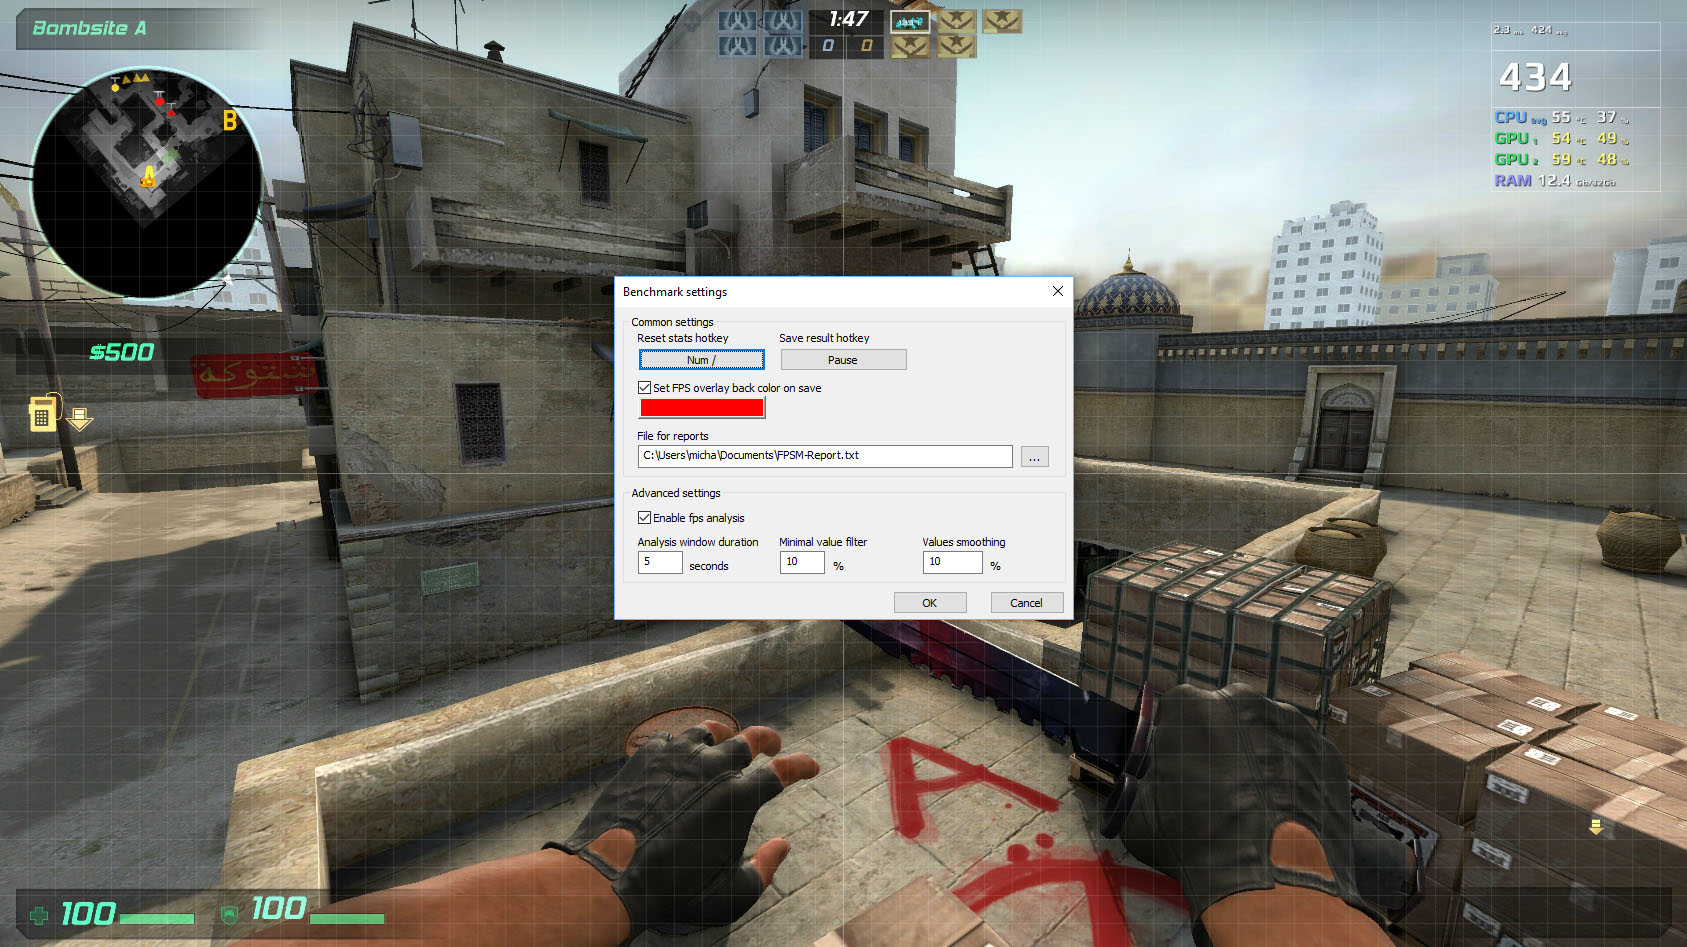 Fps Monitor Ingame Overlay Tool Which Gives Valuable System Information And Reports When Hardware Works Close To Critical State